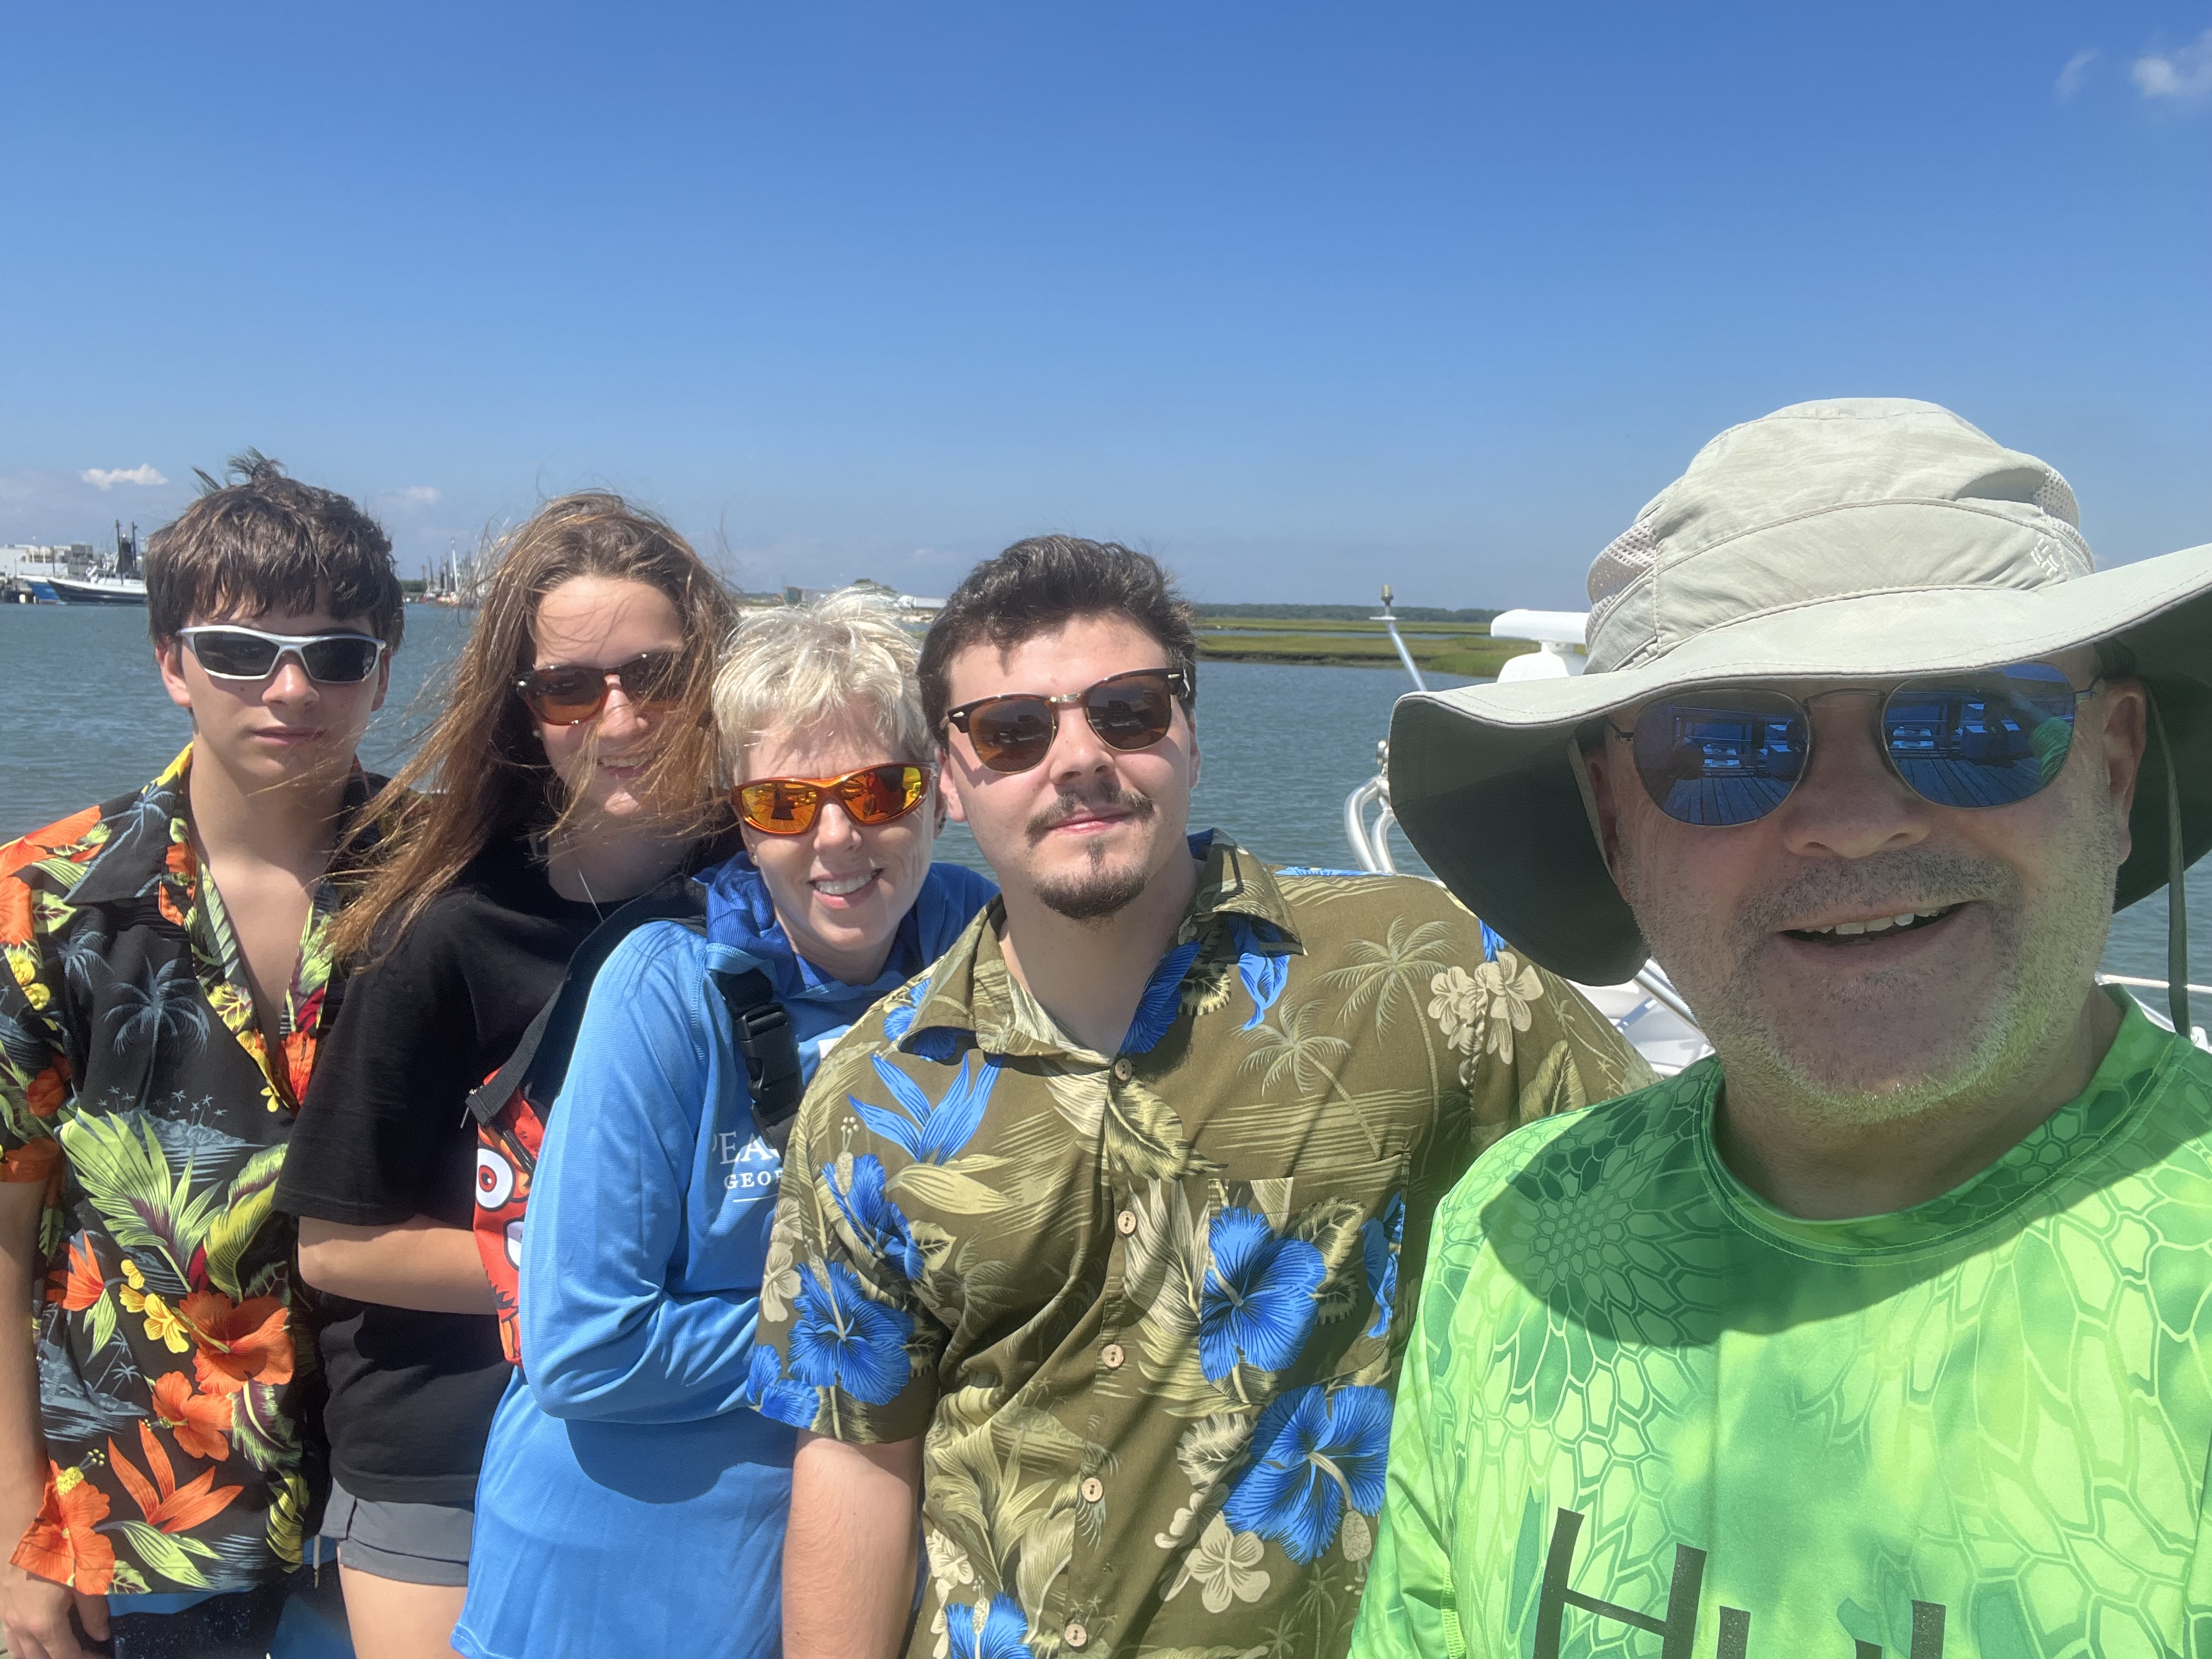 Tom Wagner and his wife Staci on vacation with three of their four children (l-r) Aaron, Eavan and Dillon. Wagner’s oldest son, Stephen, is a paralegal at the firm.